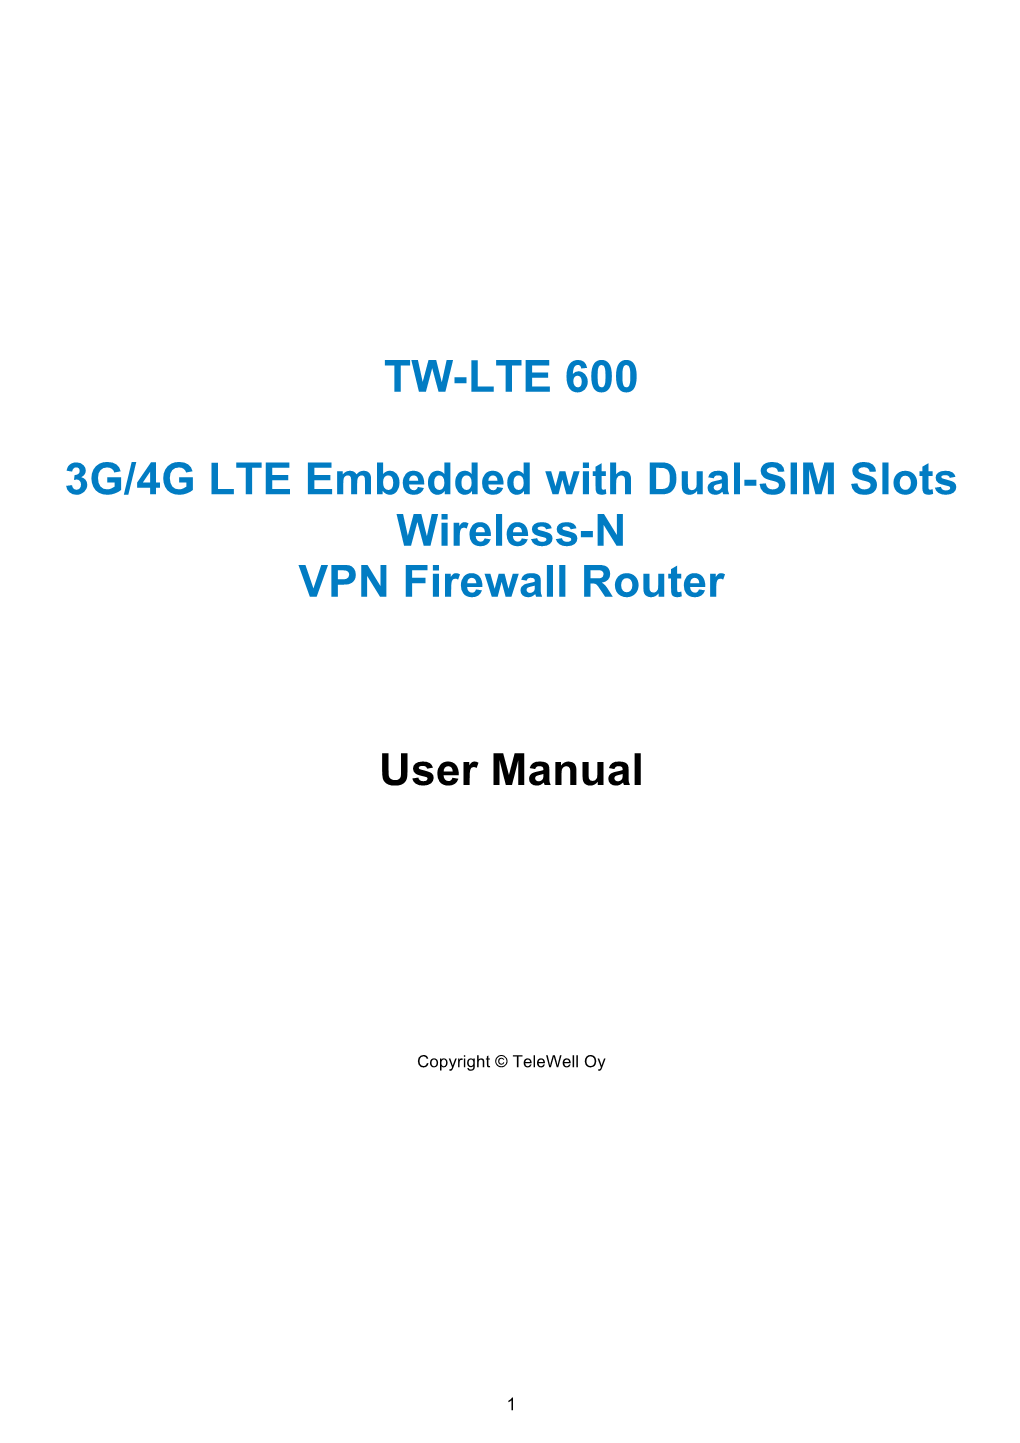 TW-LTE 600 3G/4G LTE Embedded with Dual-SIM Slots Wireless-N